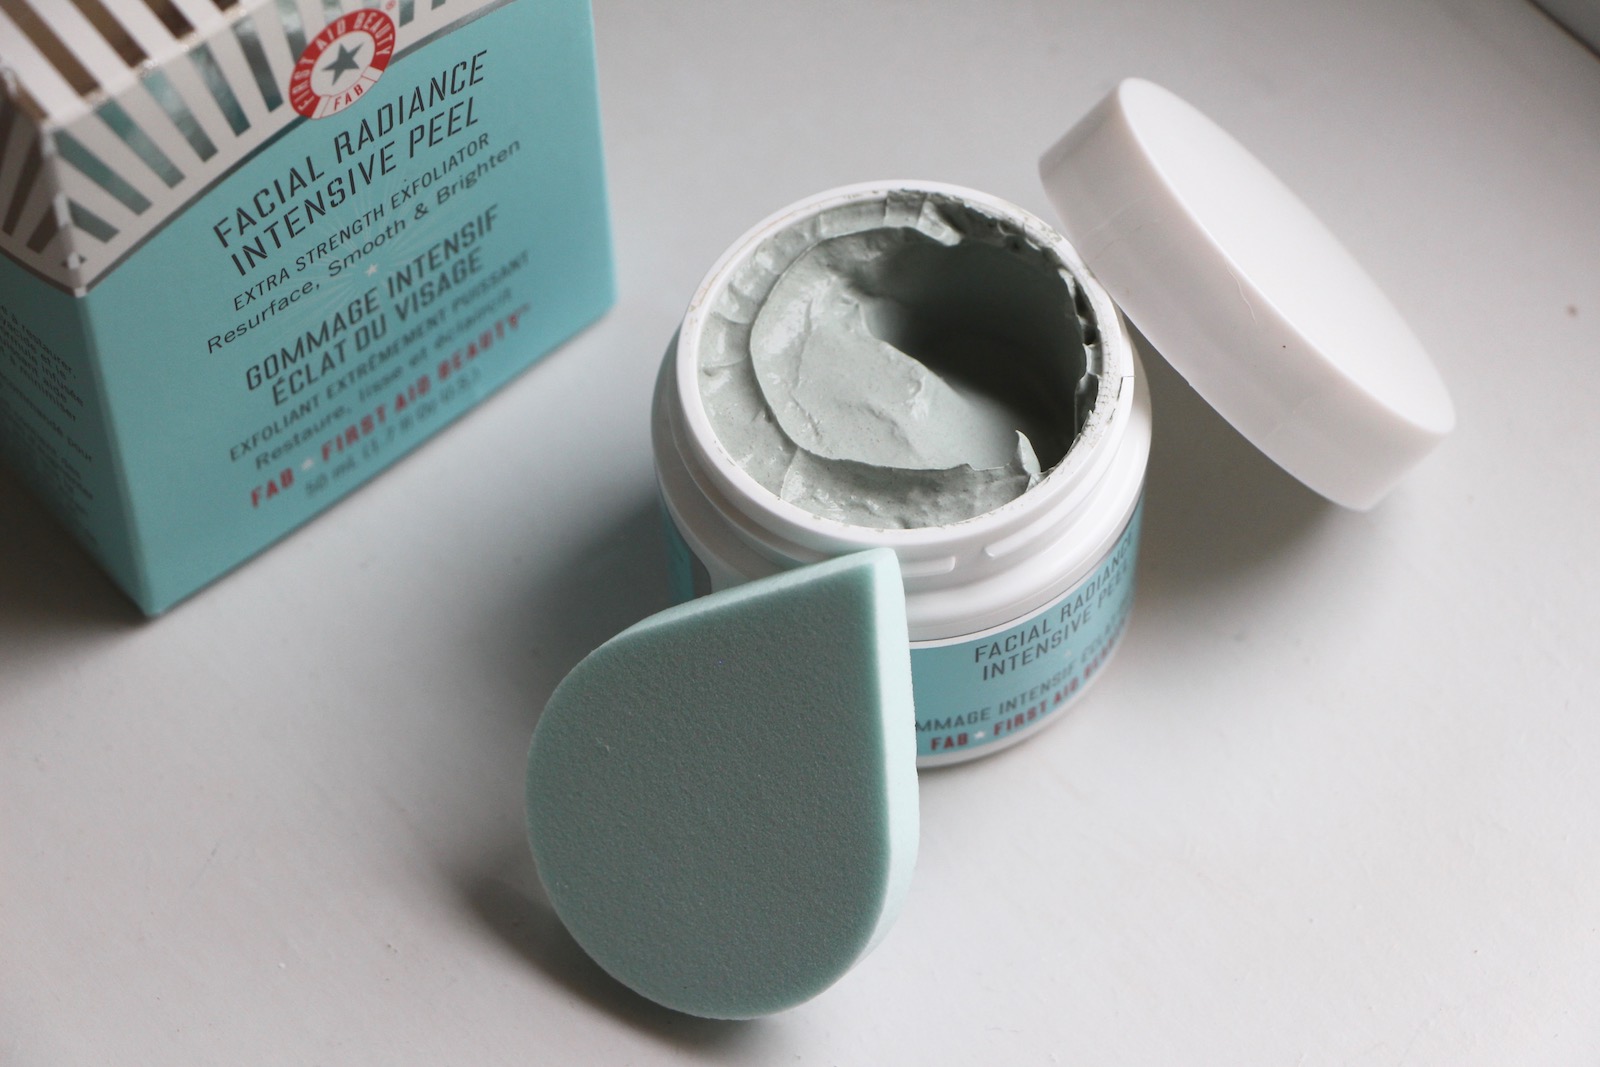 first aid beauty facial radiance intensive peel review